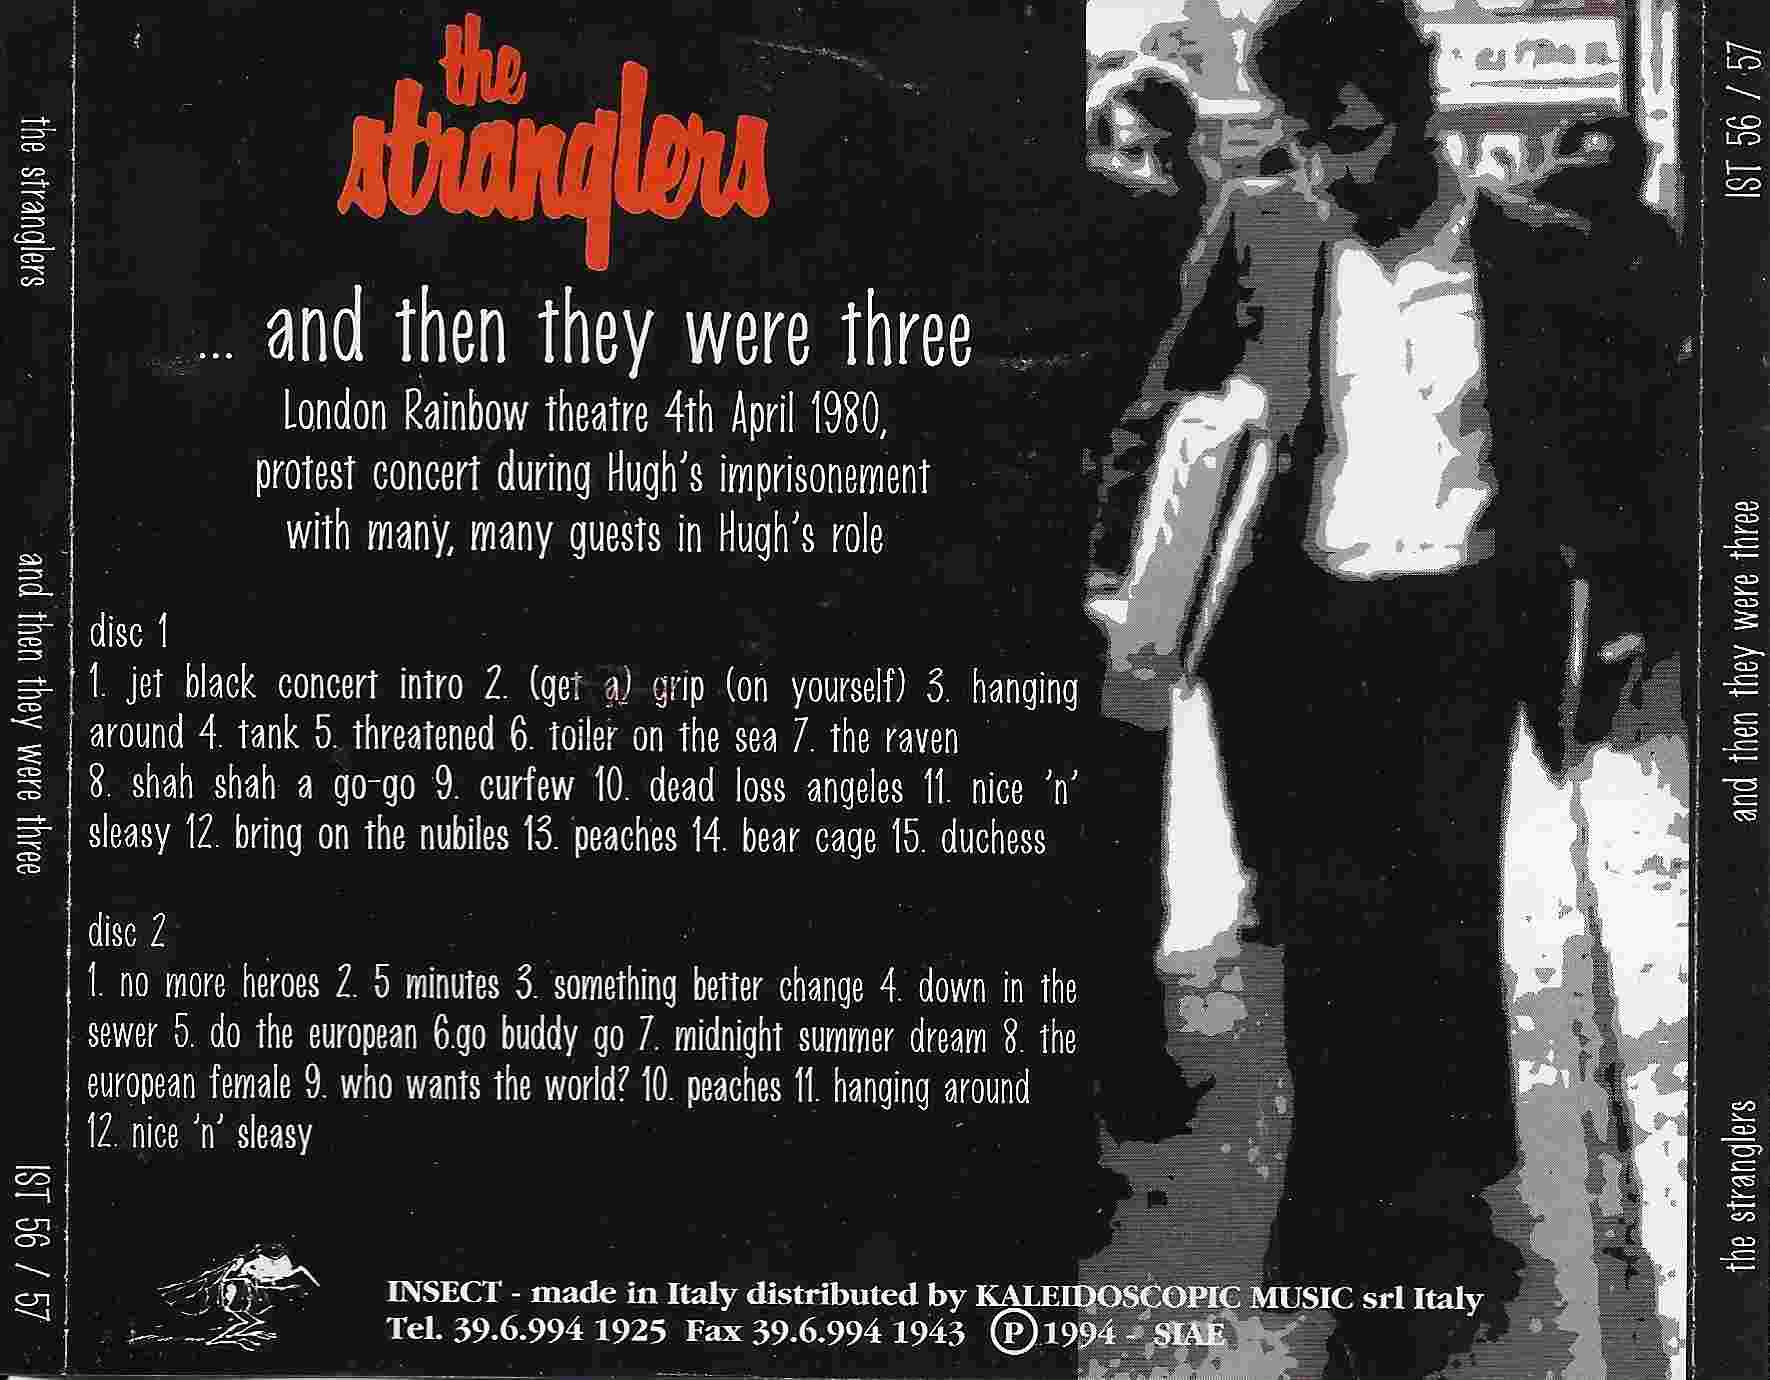 Picture of IST 57 And then they were three by artist The Stranglers from The Stranglers